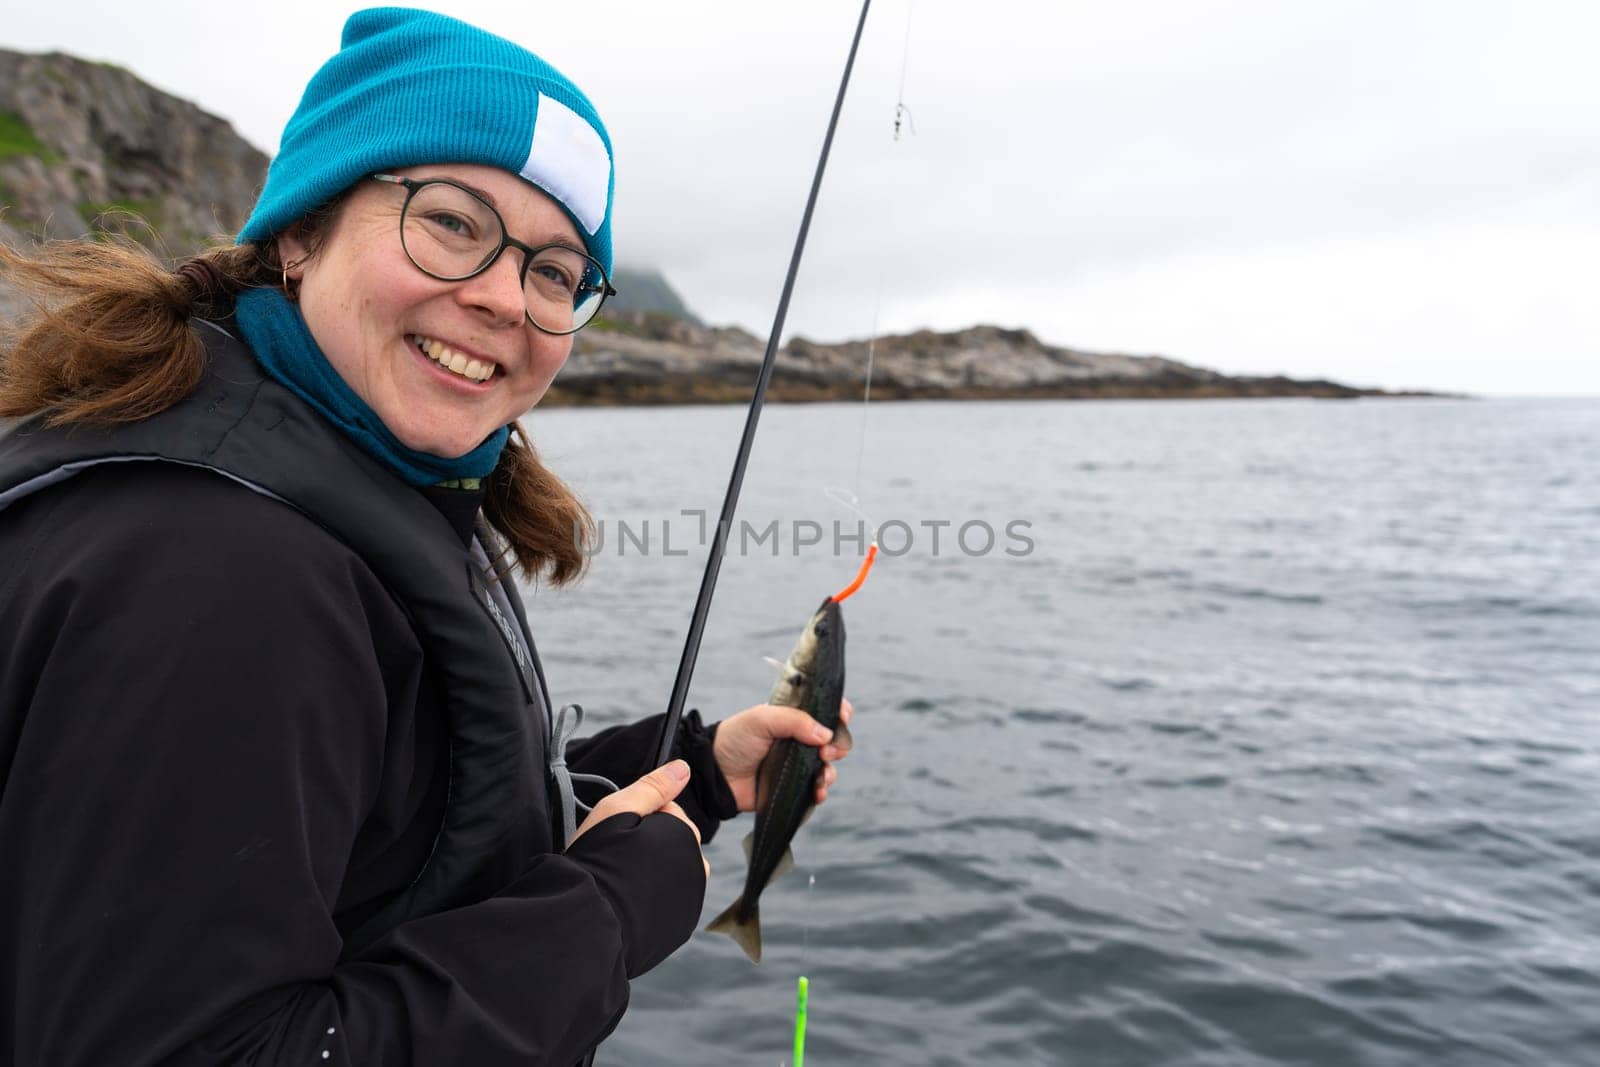 A smiling female fisherman proudly displays a large catch while standing on a boat in the Norwegian Sea, enjoying her hobby and the beauty of the ocean on a sunny day.